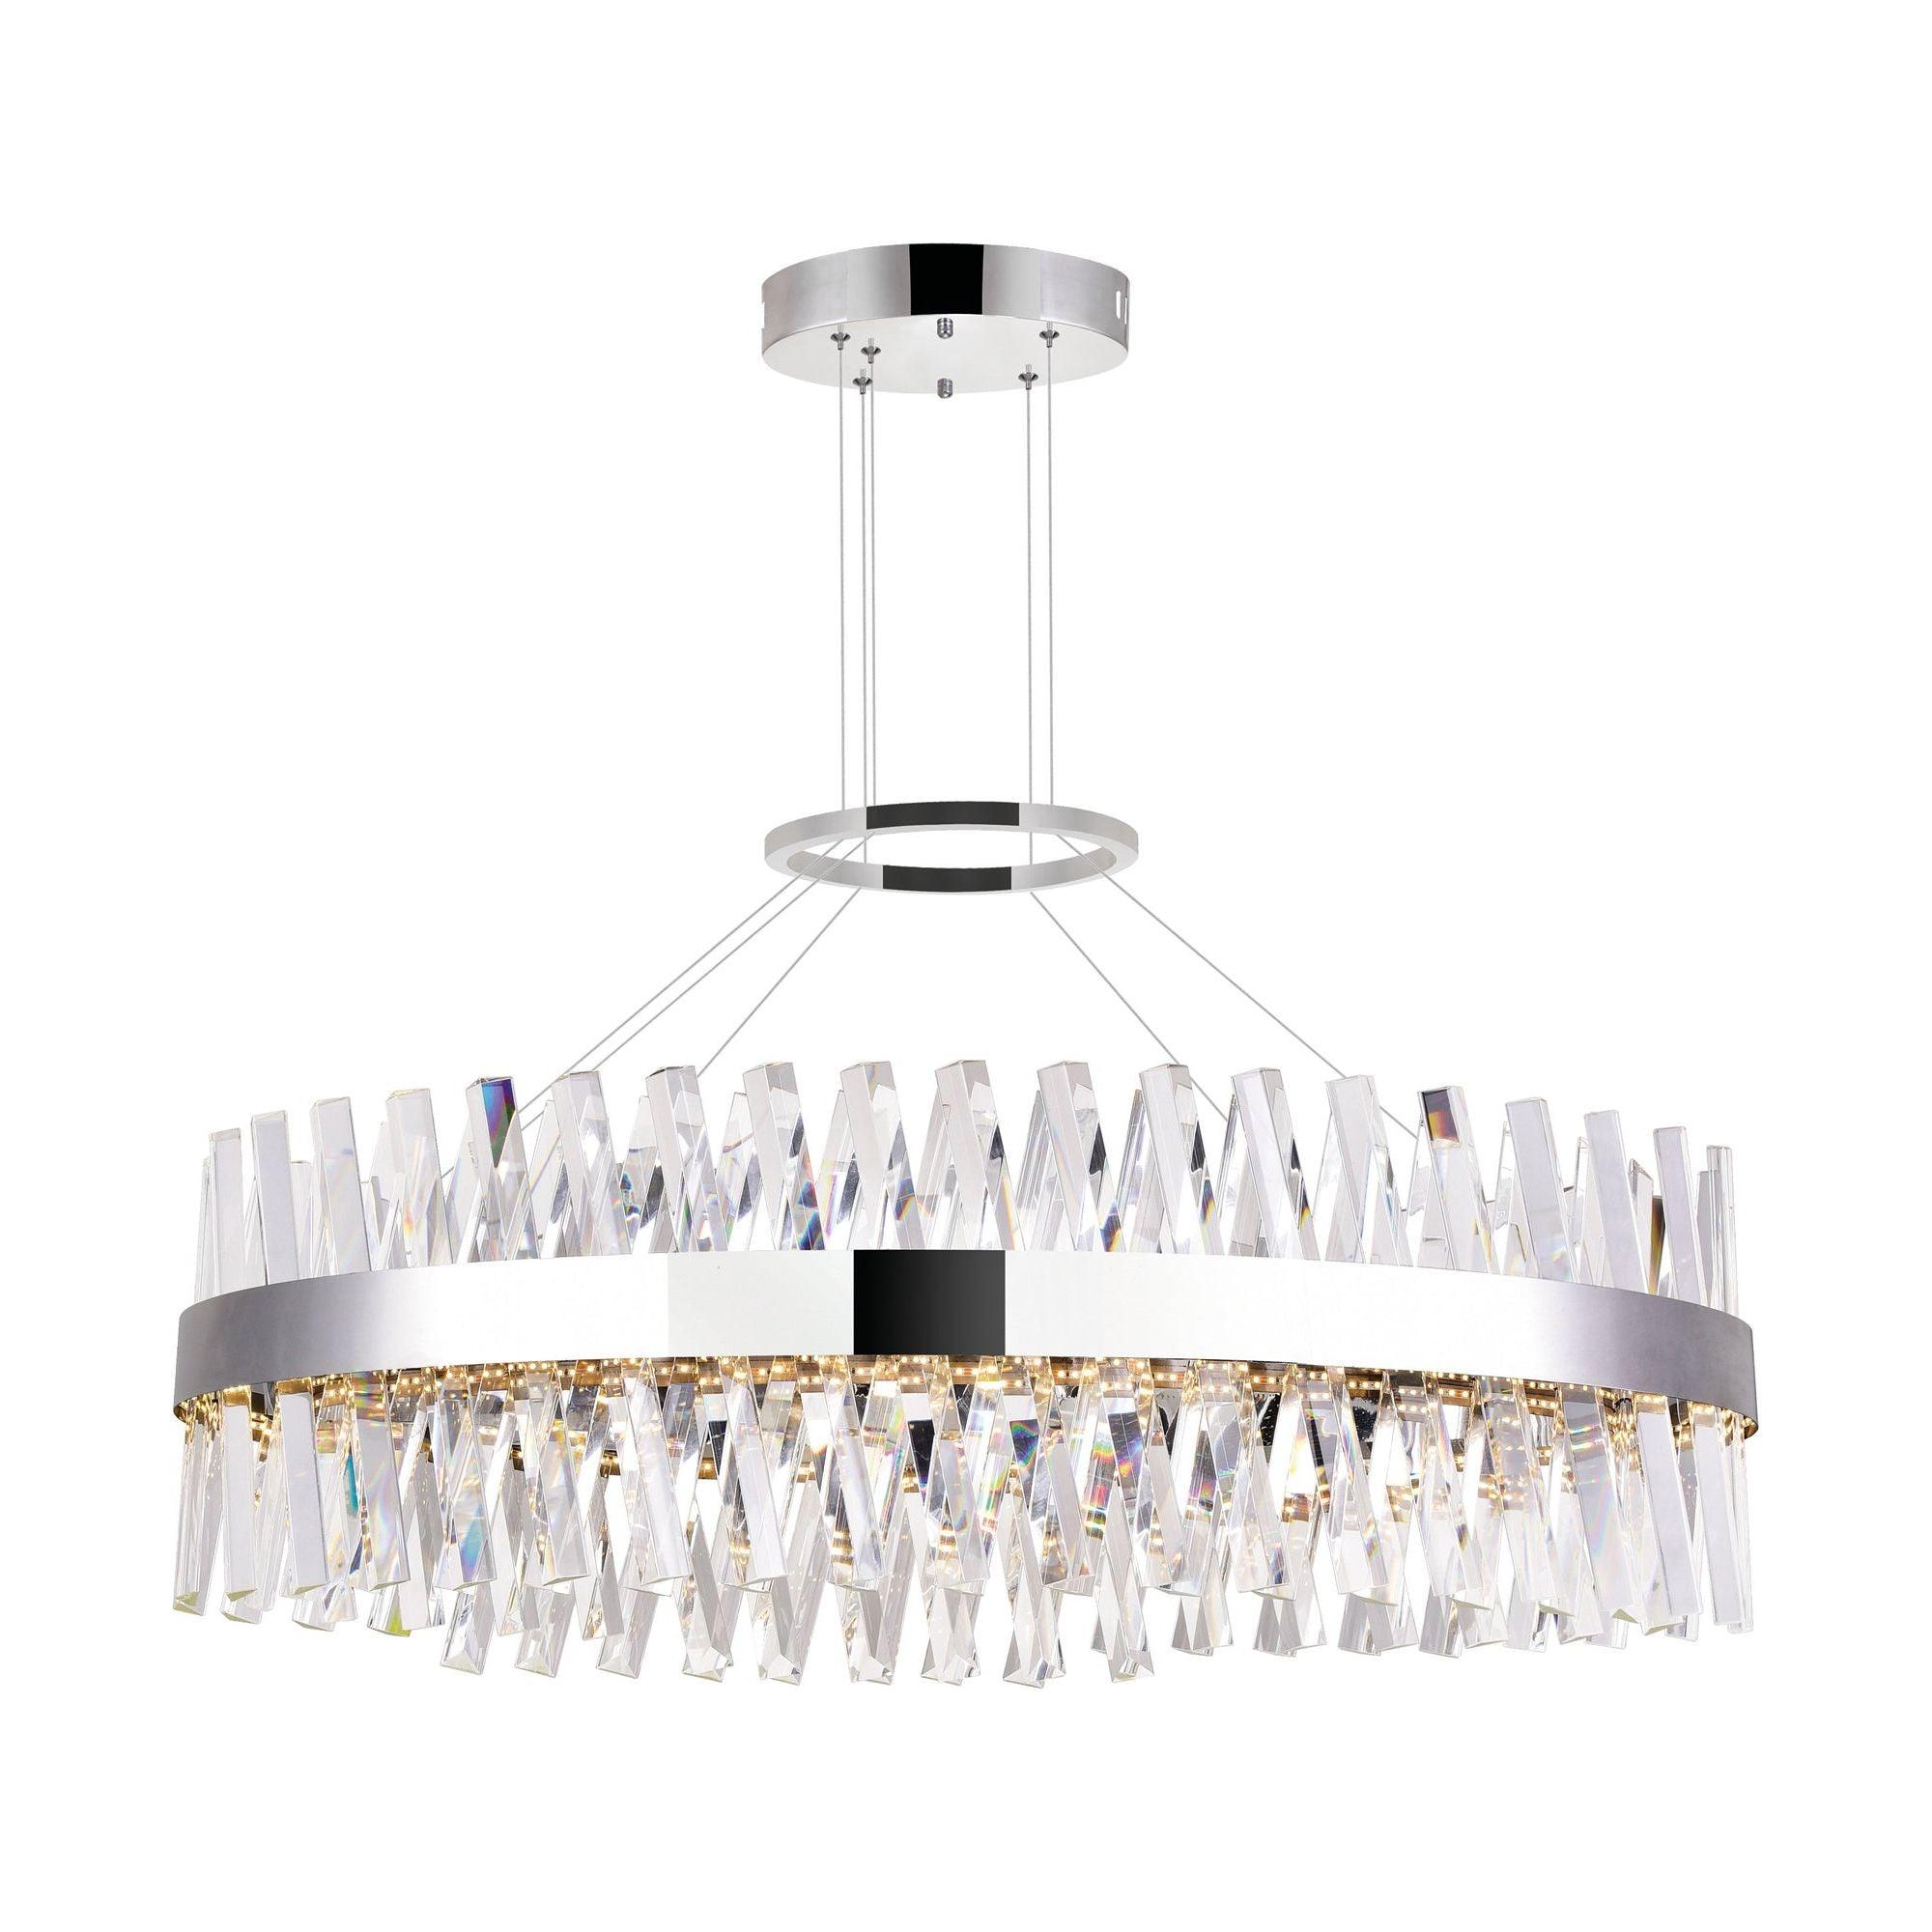 CWI - Glace Linear Suspension - Lights Canada